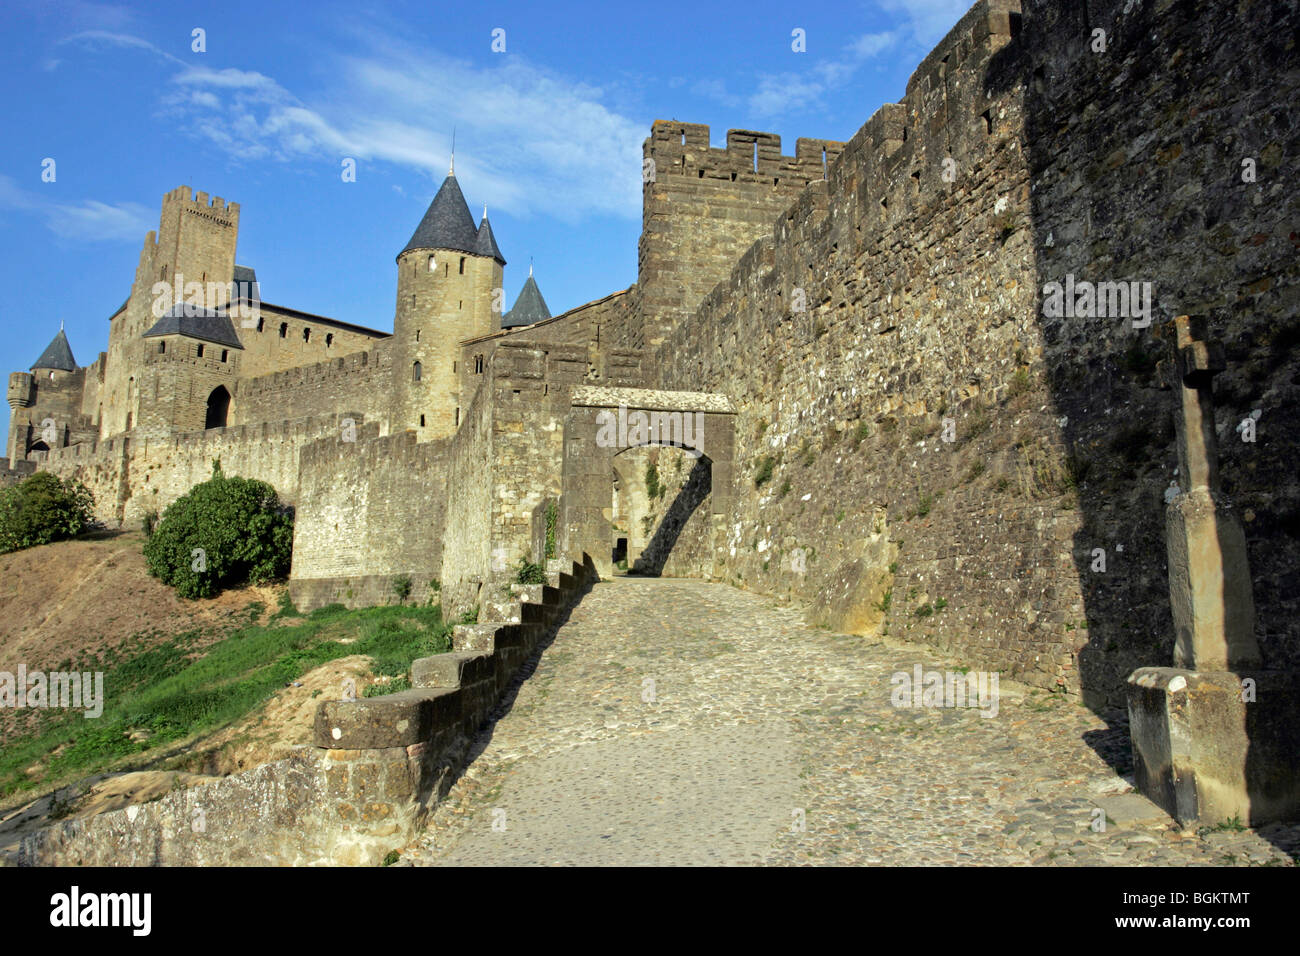 Medieval walled fortress city of Carcassonne Aude France Stock Photo